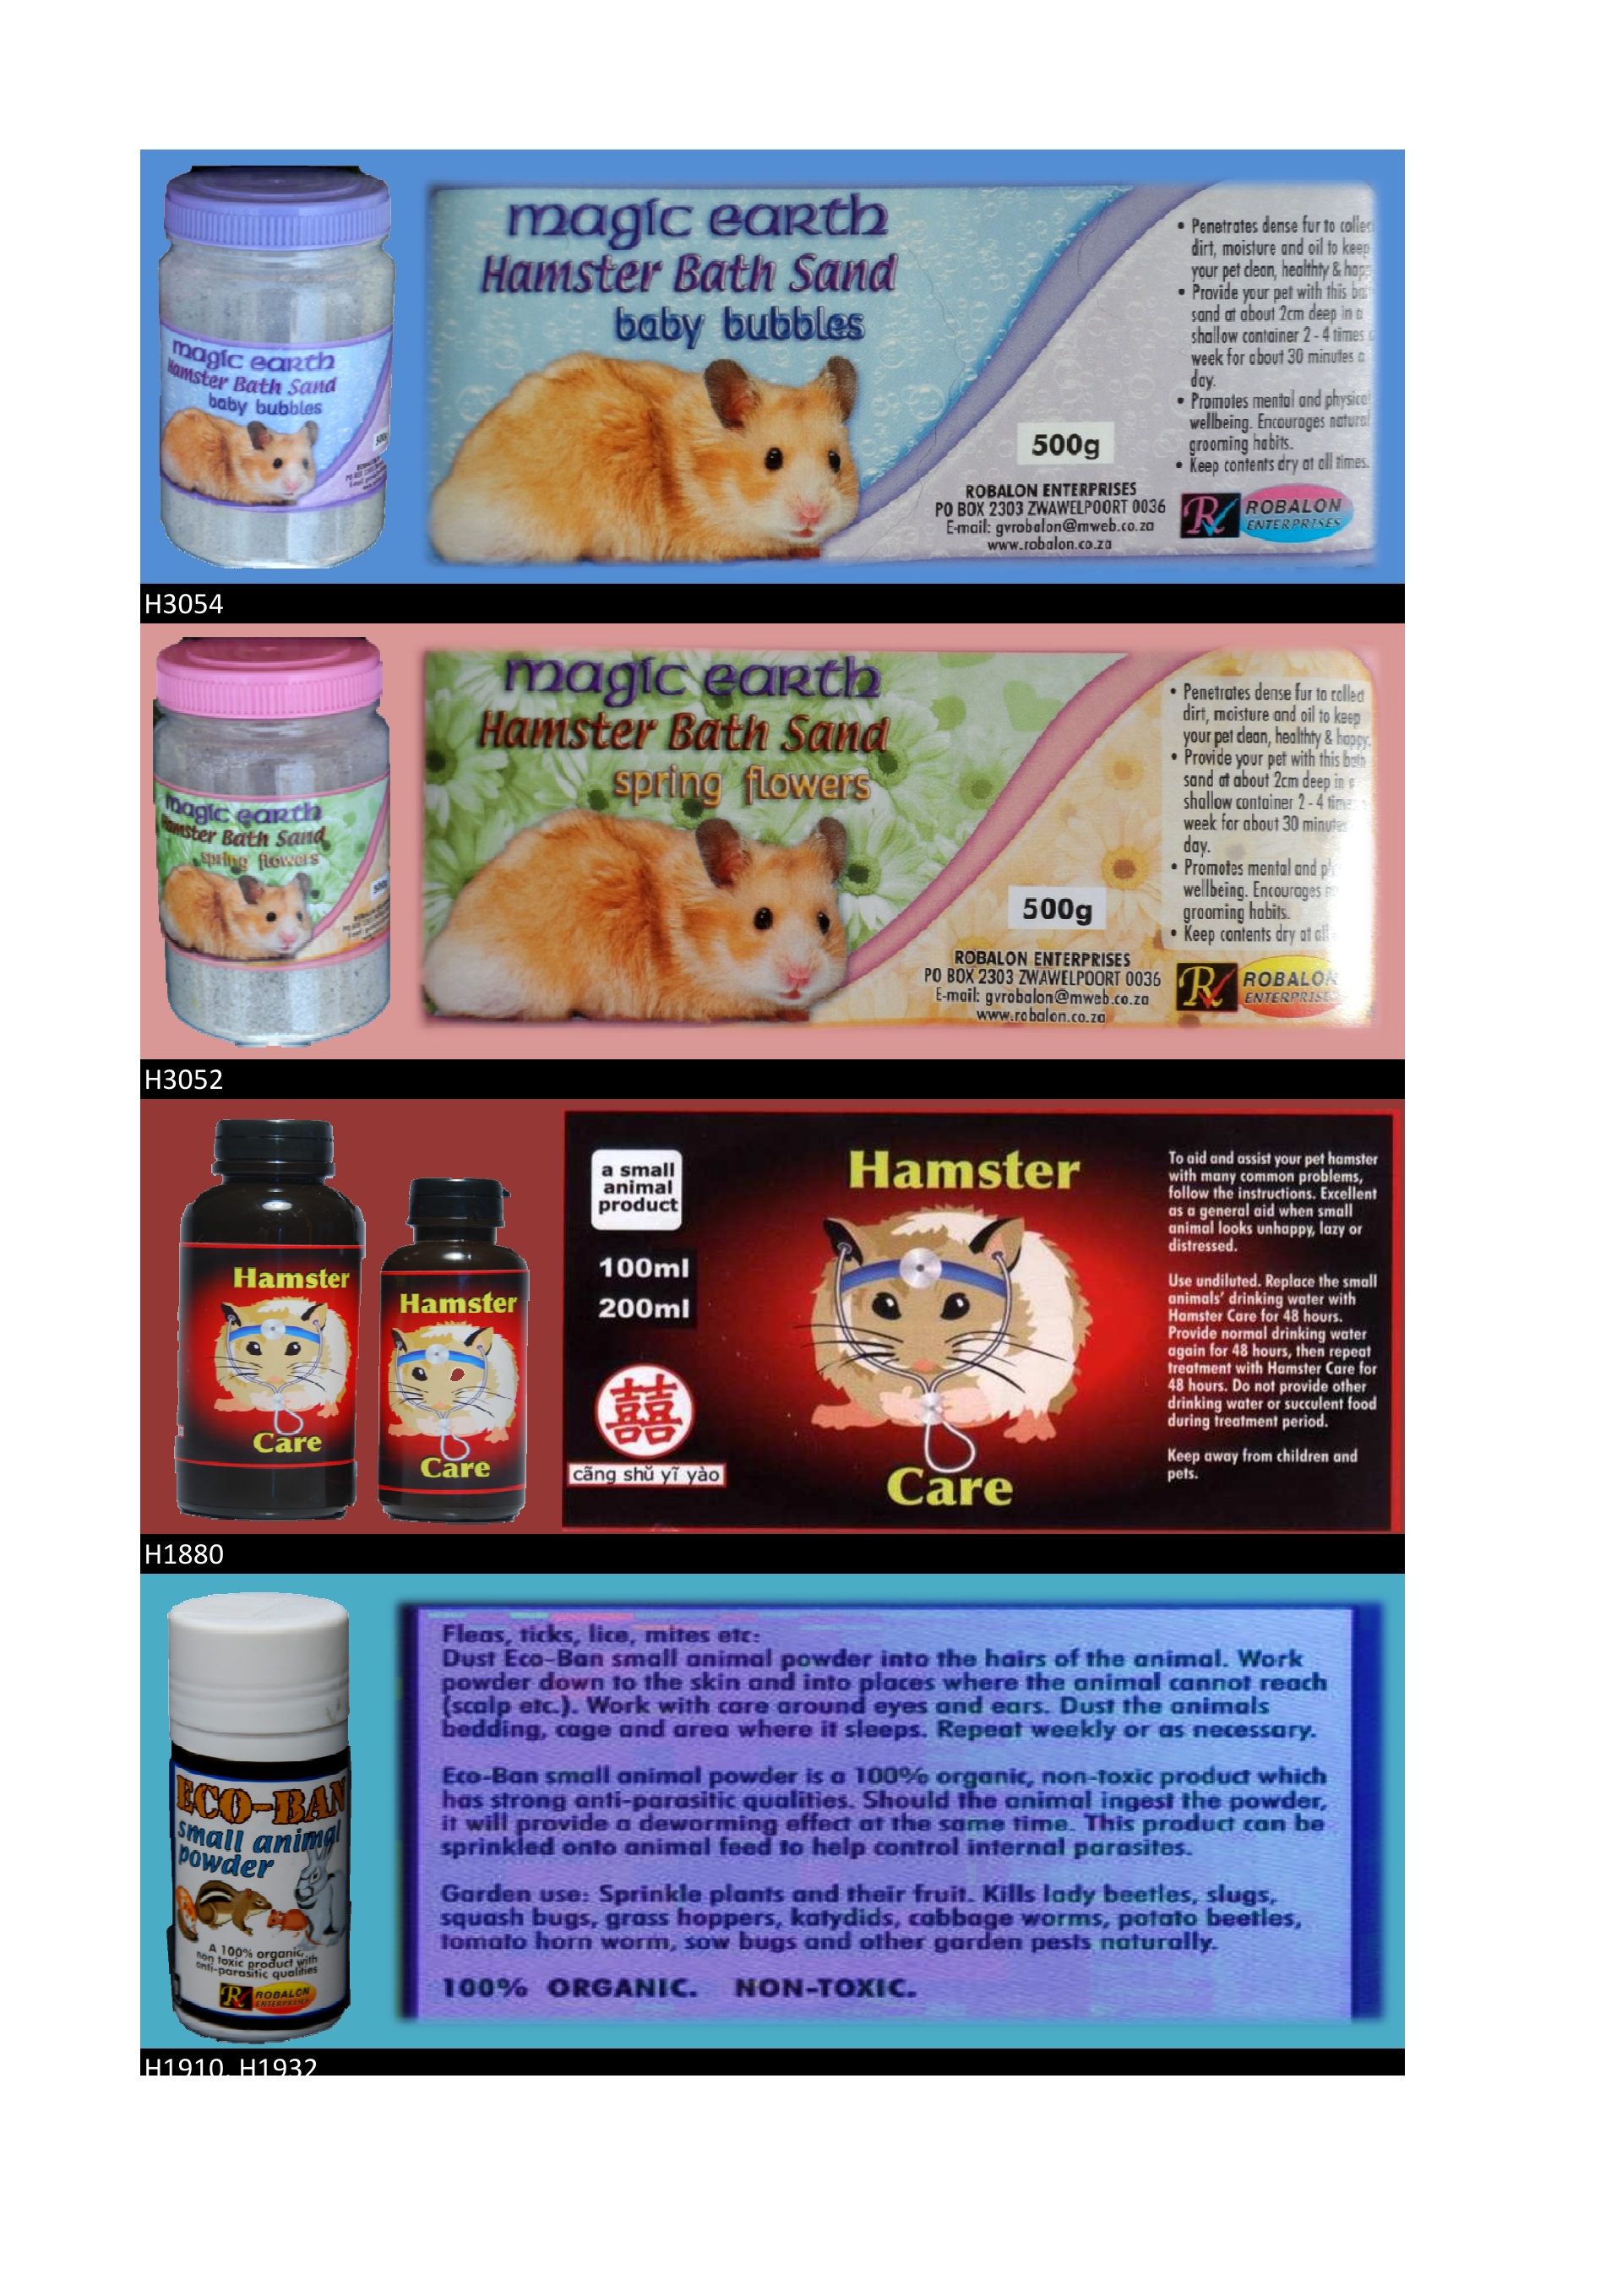 SMALL_ANIMAL_PRODUCTS-2